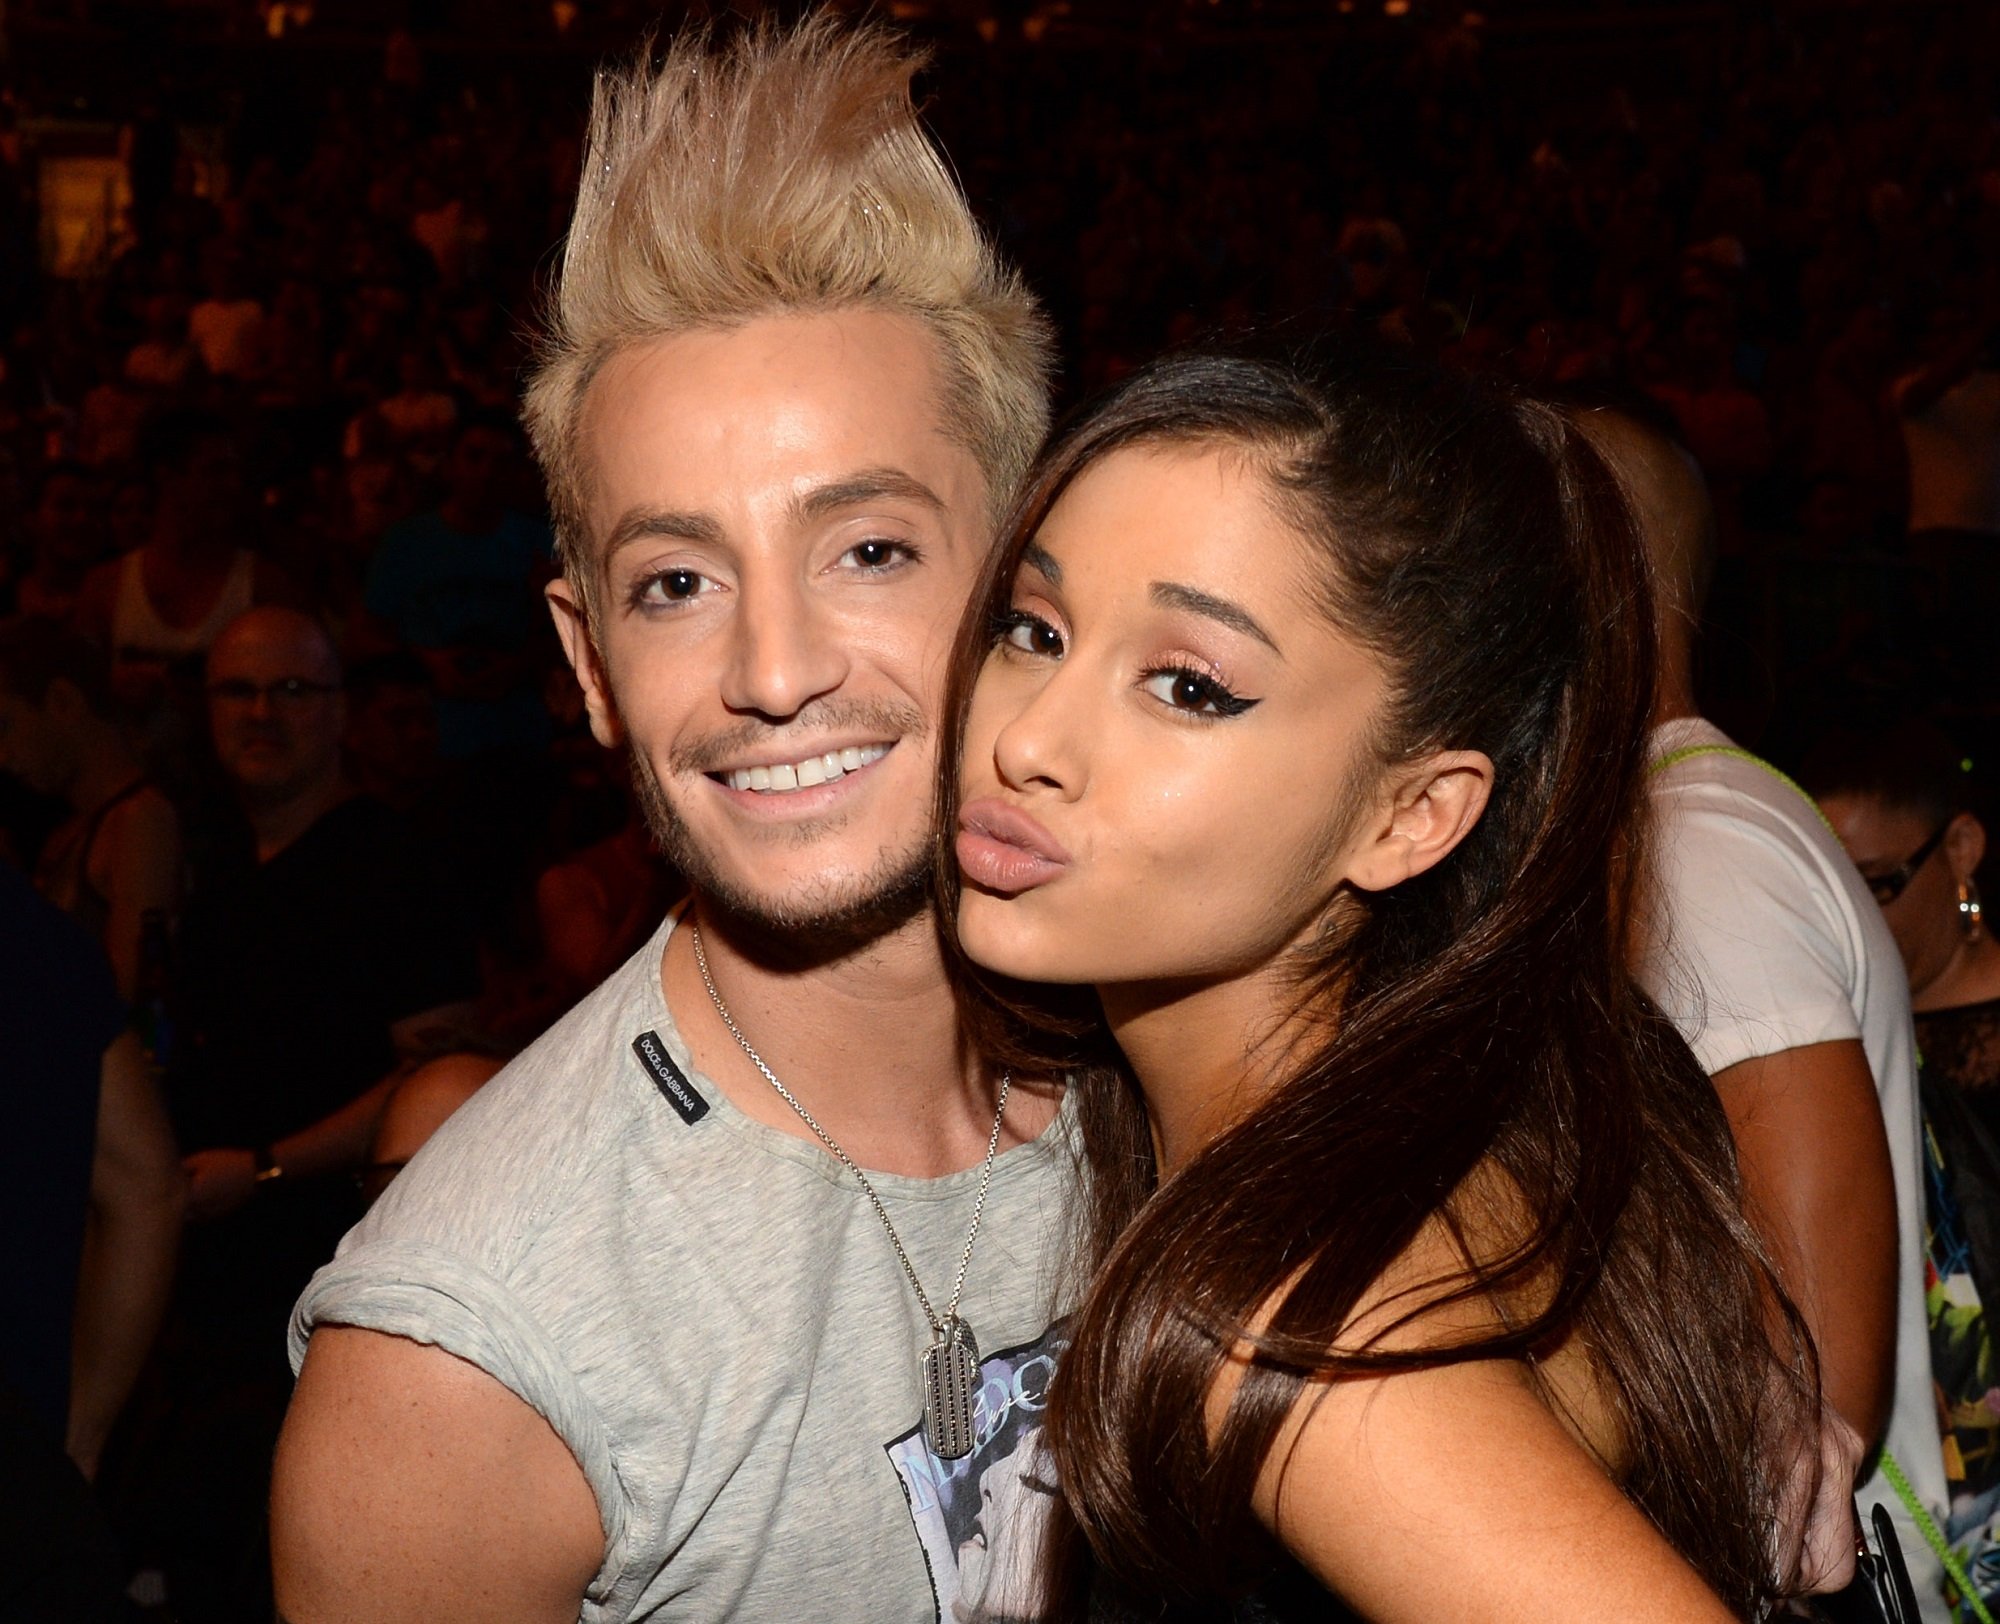 Frankie J Grande and Ariana Grande pose before Madonna performs onstage during her "Rebel Heart" tour at Madison Square Garden on September 16, 2015 in New York City. 